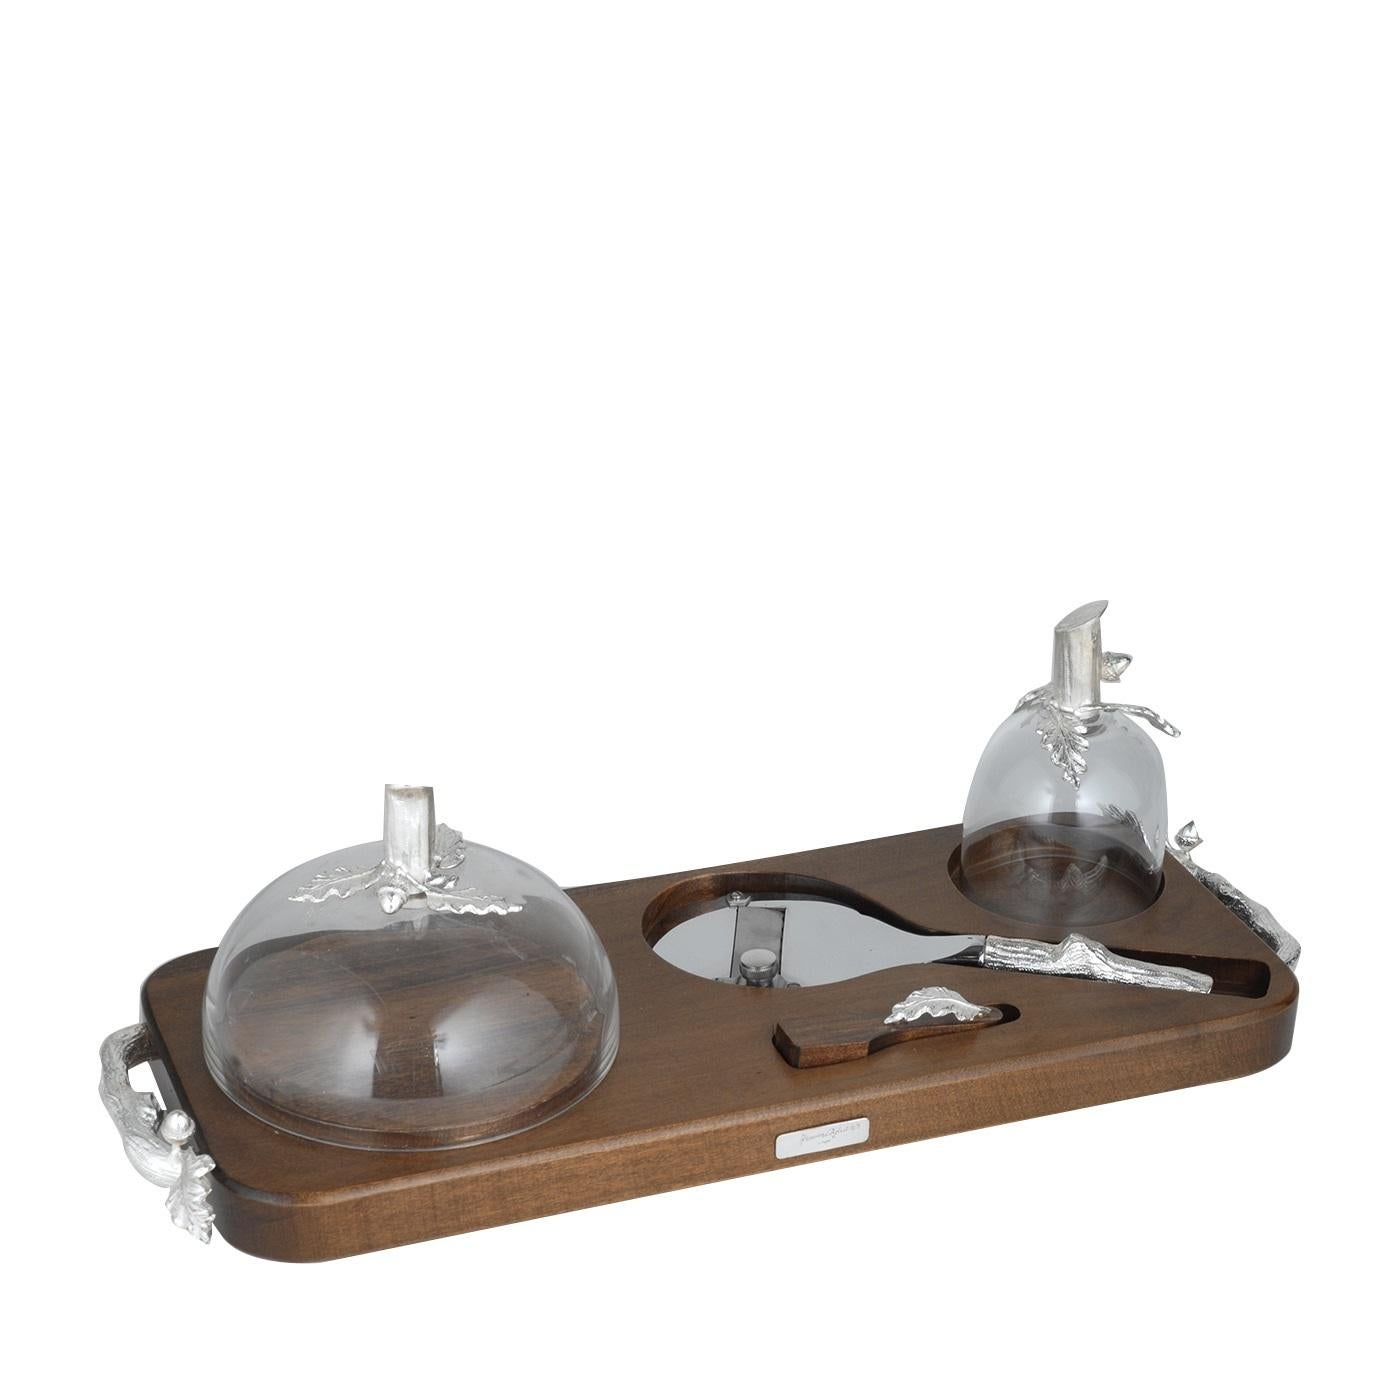 This exquisite truffle and cheese set will be a great gift for a food lover and a splendid addition to any home. Its tray is made of wood and supports two crystal lids (one for cheeses, the other for truffles), one truffle knife, and one truffle